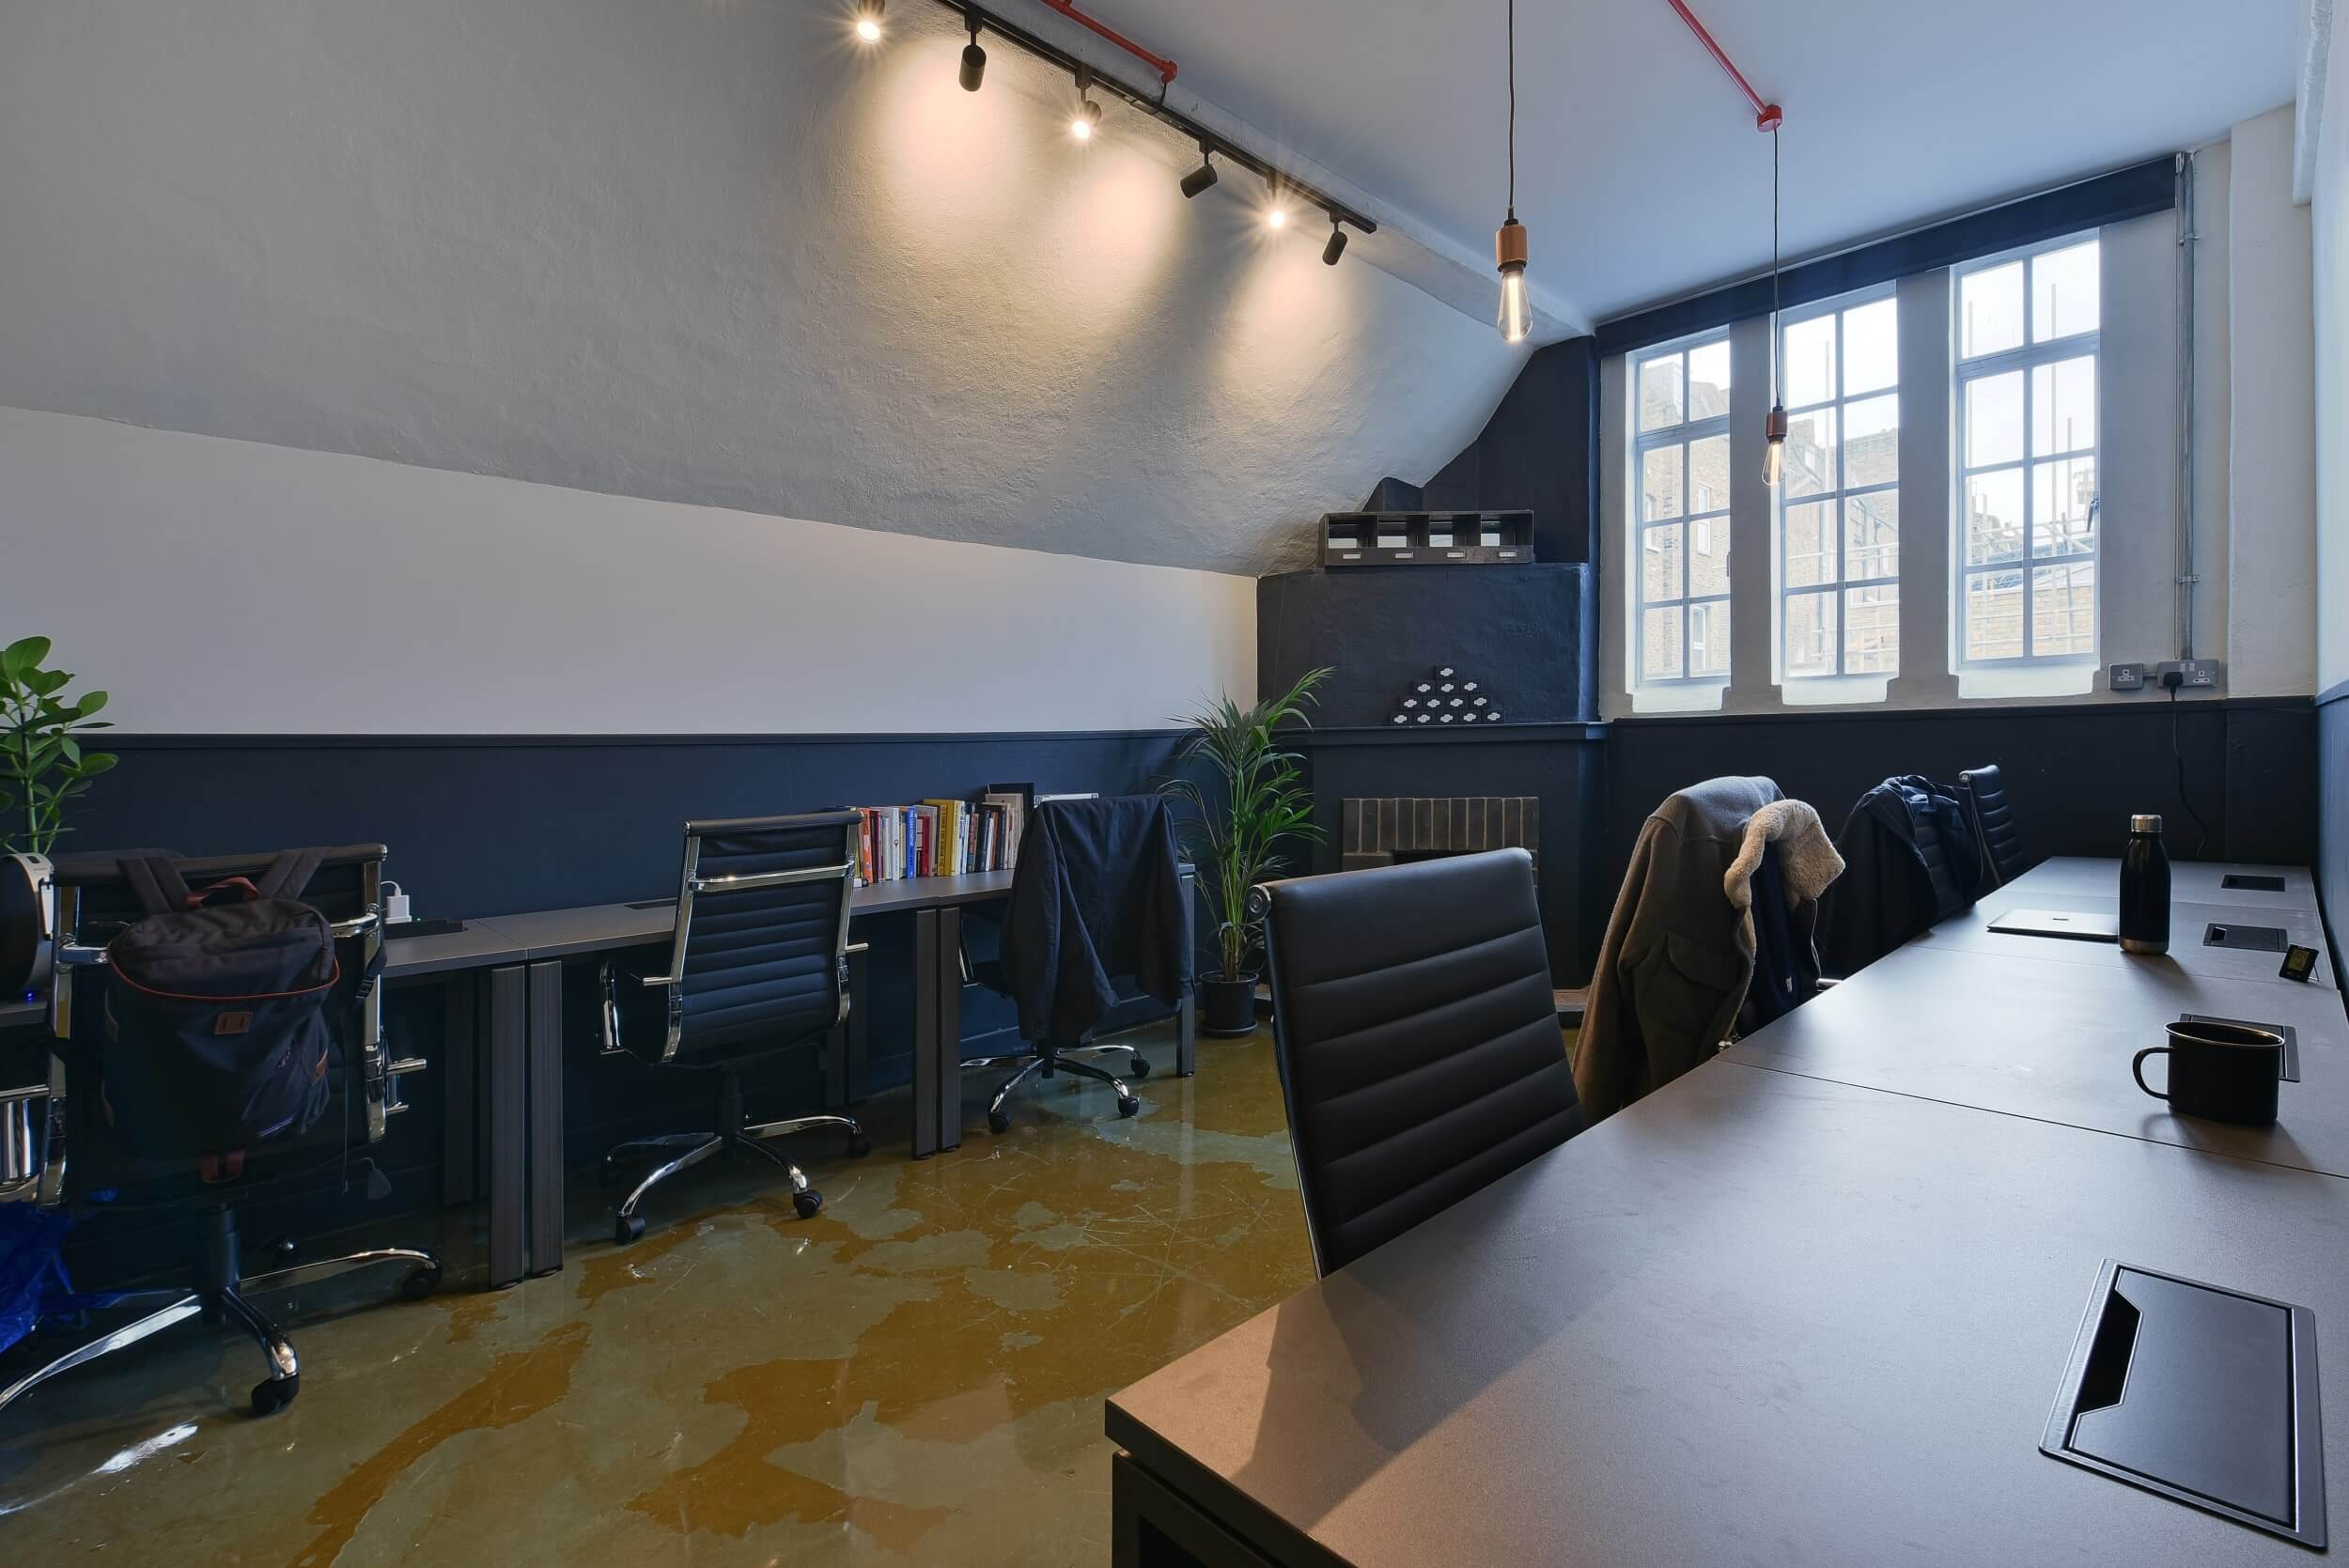 Co-Working space